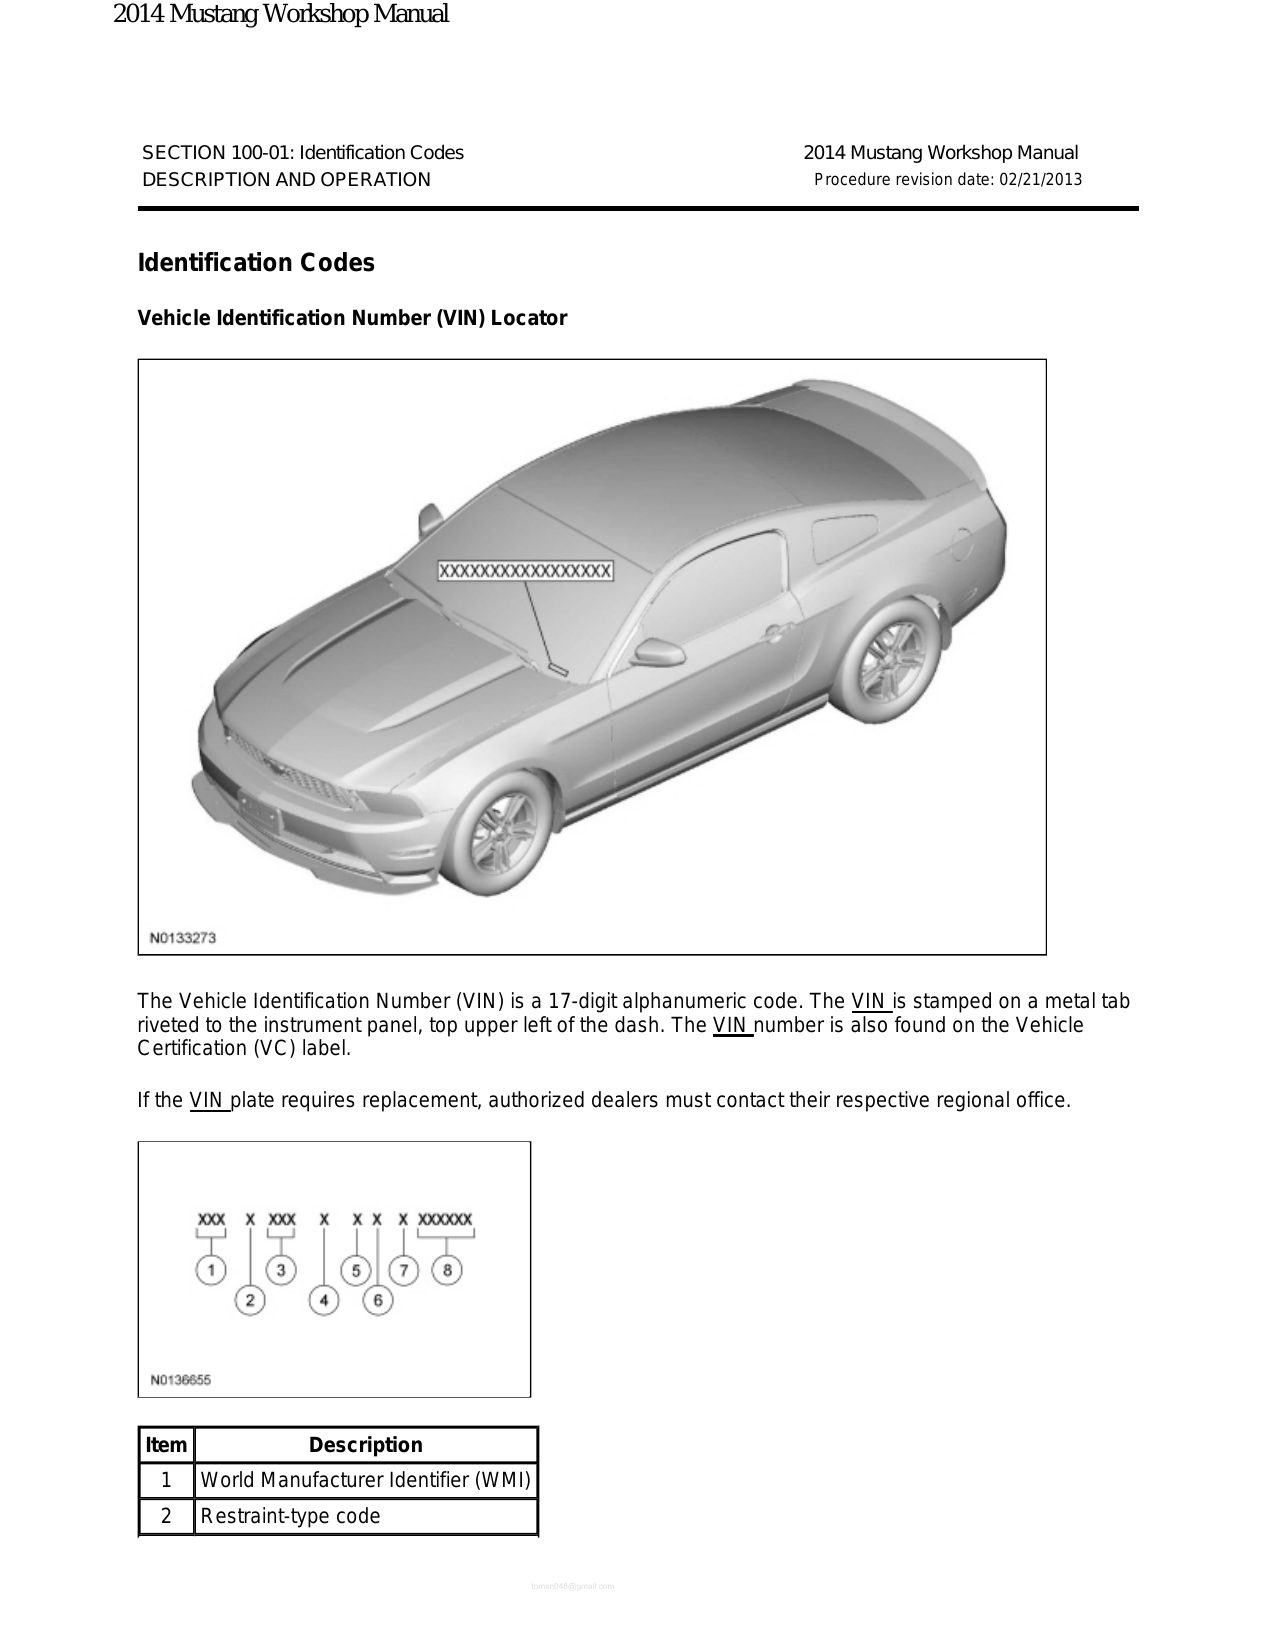 2013-2014 Ford Mustang 3.7L V6, 5.0L V8, Coupe/Convertible shop manual Preview image 6